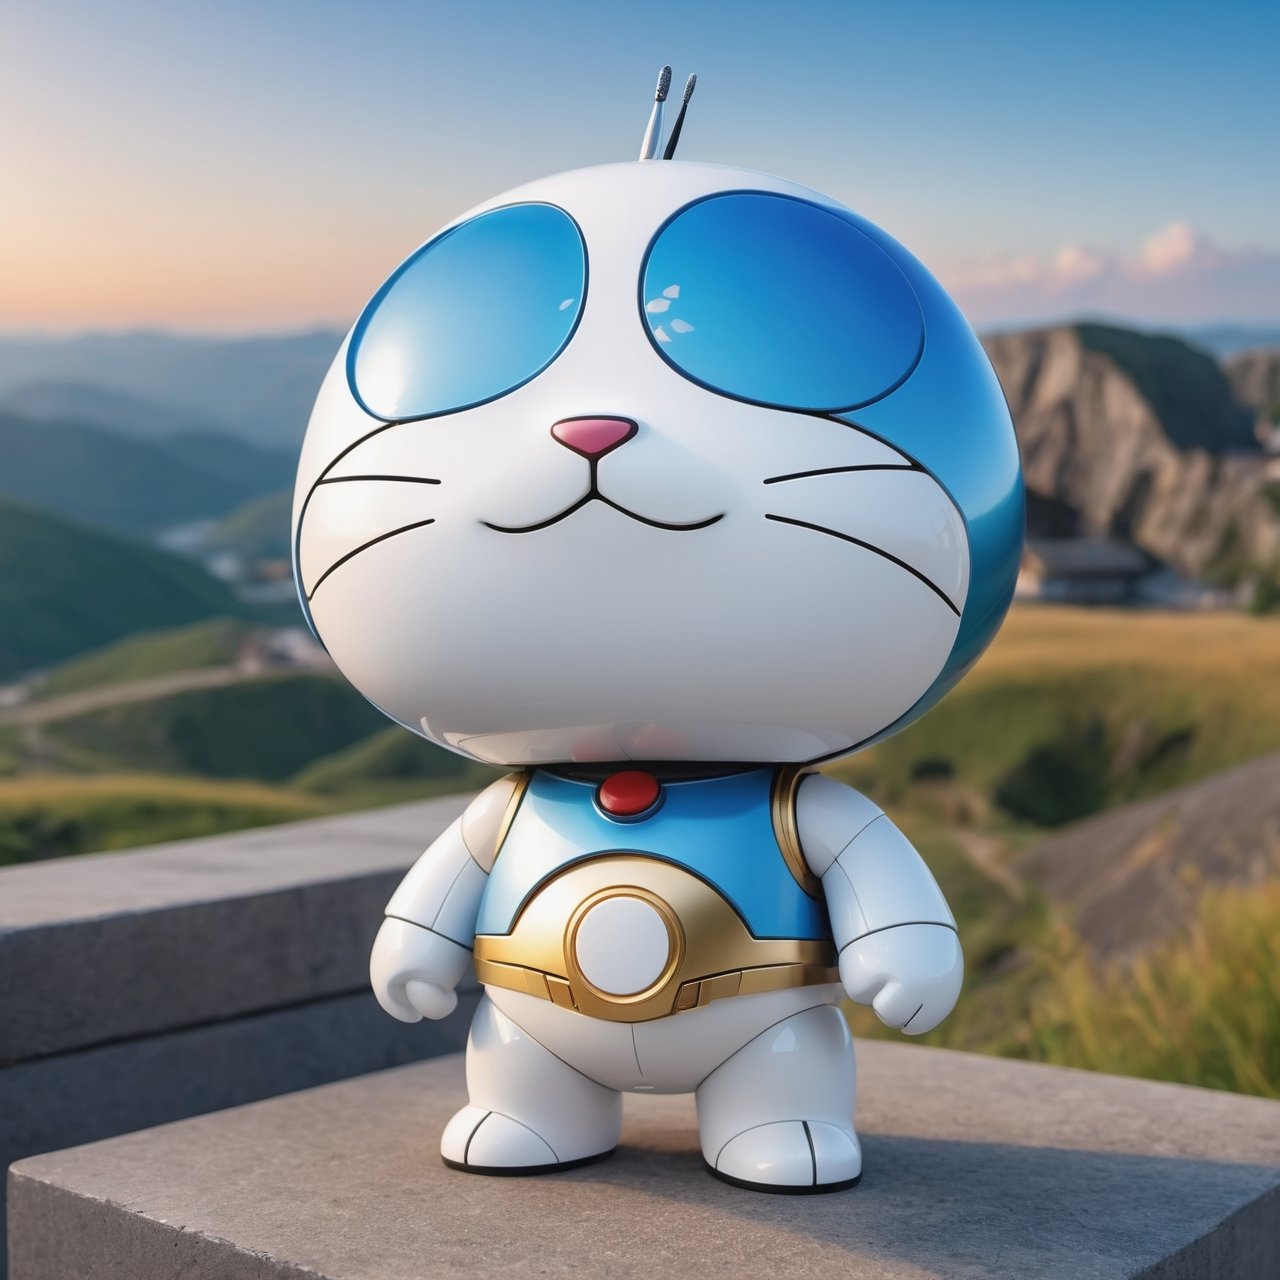 (masterpiece:1.2, highest quality), (realistic, photo_realistic:1.9)
1chibi_robot, Cute chibi robot, Designer look holding a paintbrush in one hand, white with blue, (detailed background), (gradients), colorful, detailed landscape, visual key, shiny skin. Modern place, Action camera. Portrait film. Standard lens. Golden hour lighting.
sharp focus, 8k, UHD, high quality, frowning, intricate detailed, highly detailed, hyper-realistic,interior,doraemon Chibi,chibi emote style